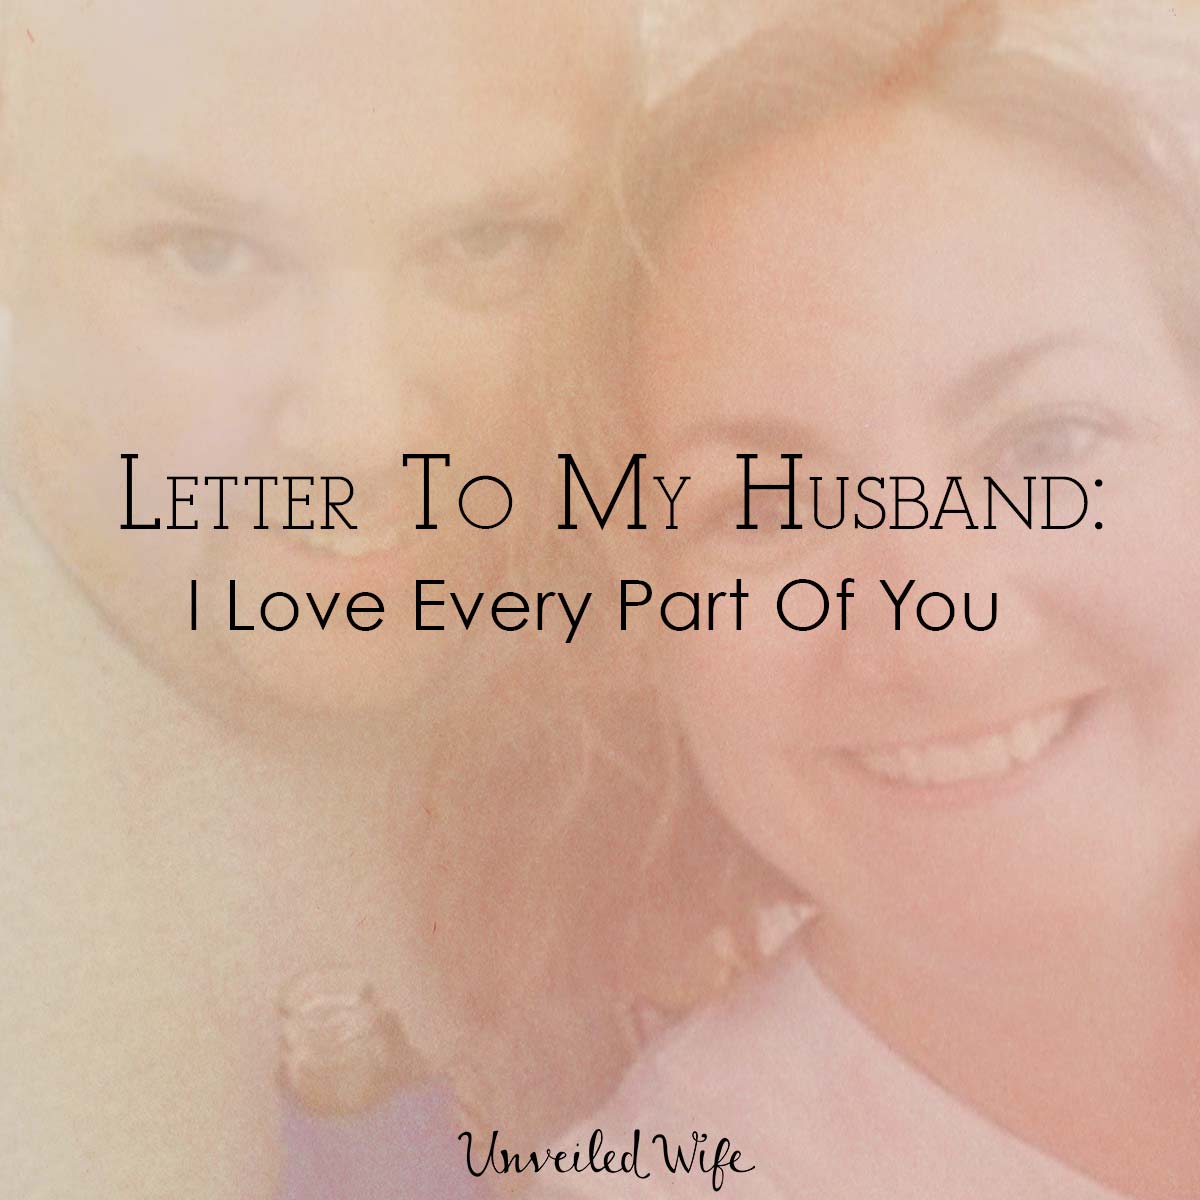 Letter To My Husband: I believe in US